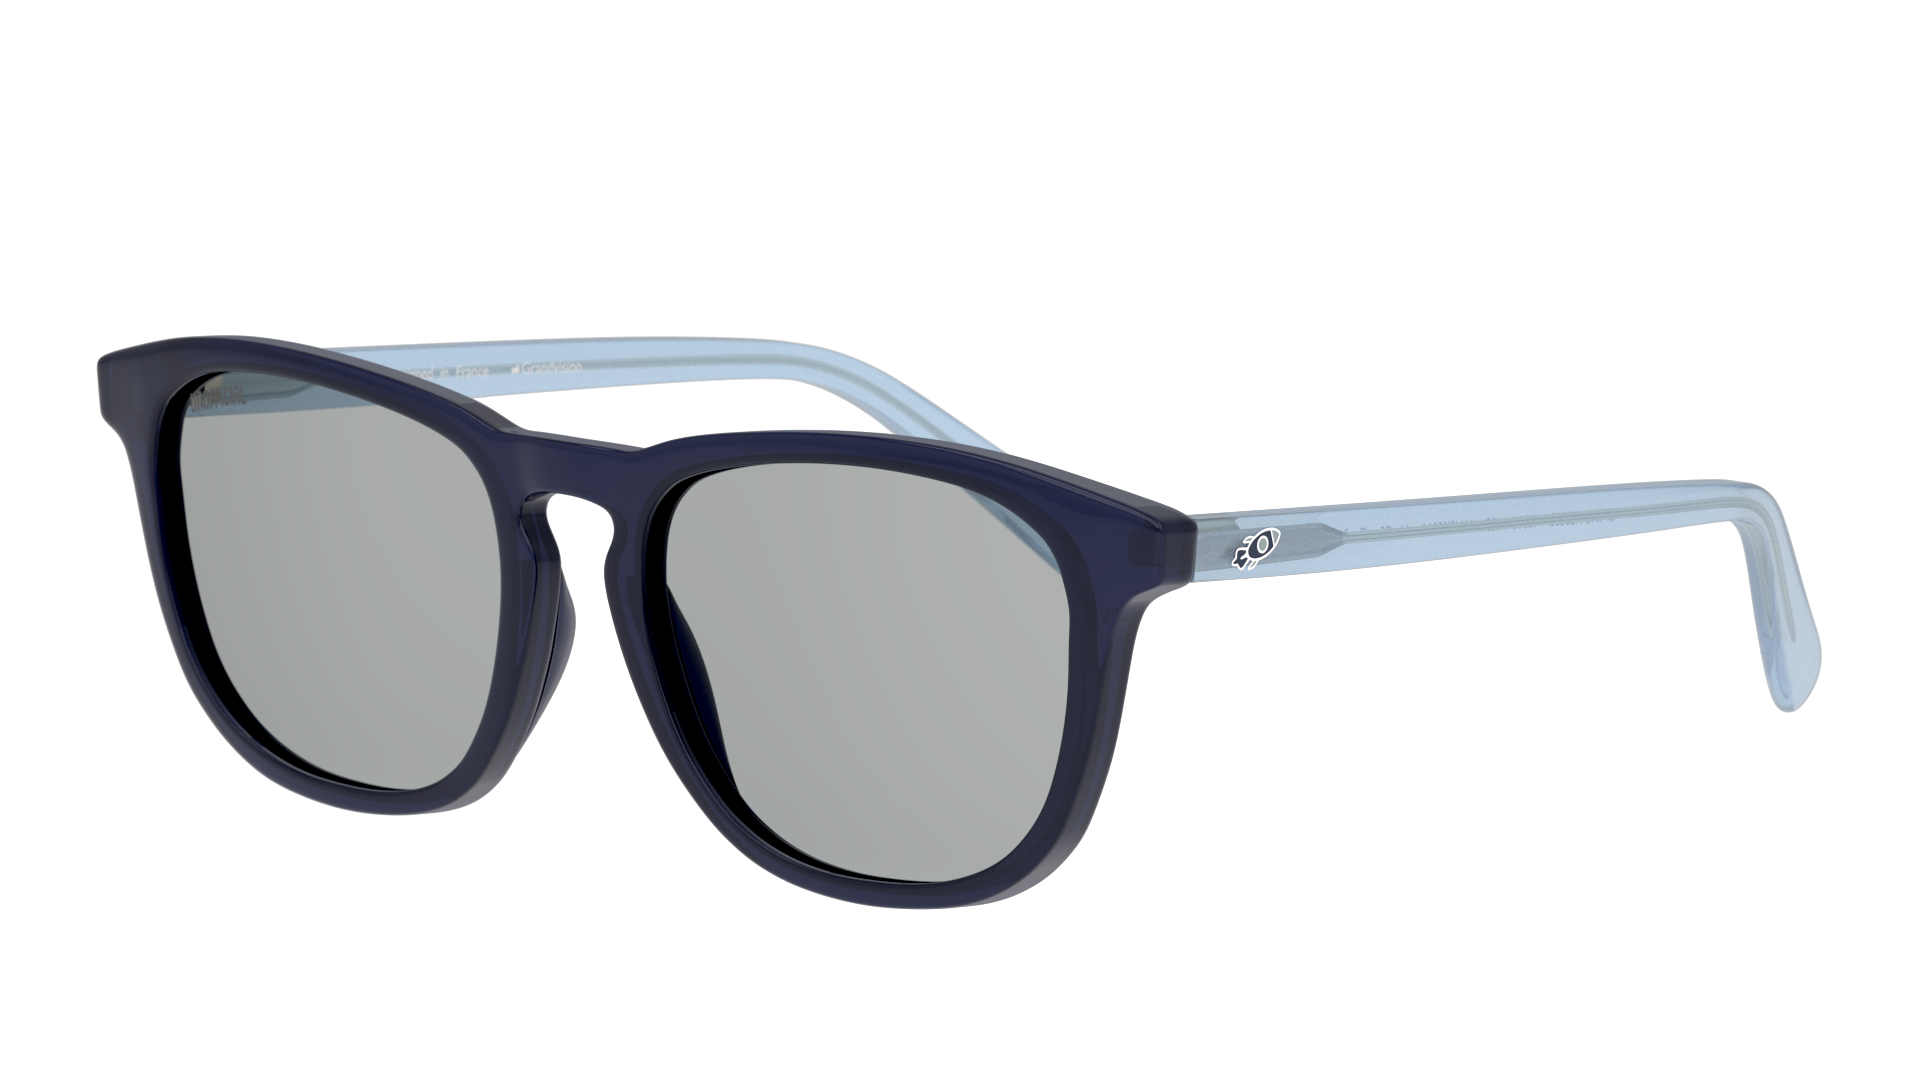 Angle_Left01 Unofficial UNSK5016 LLGS Grigio / Blu